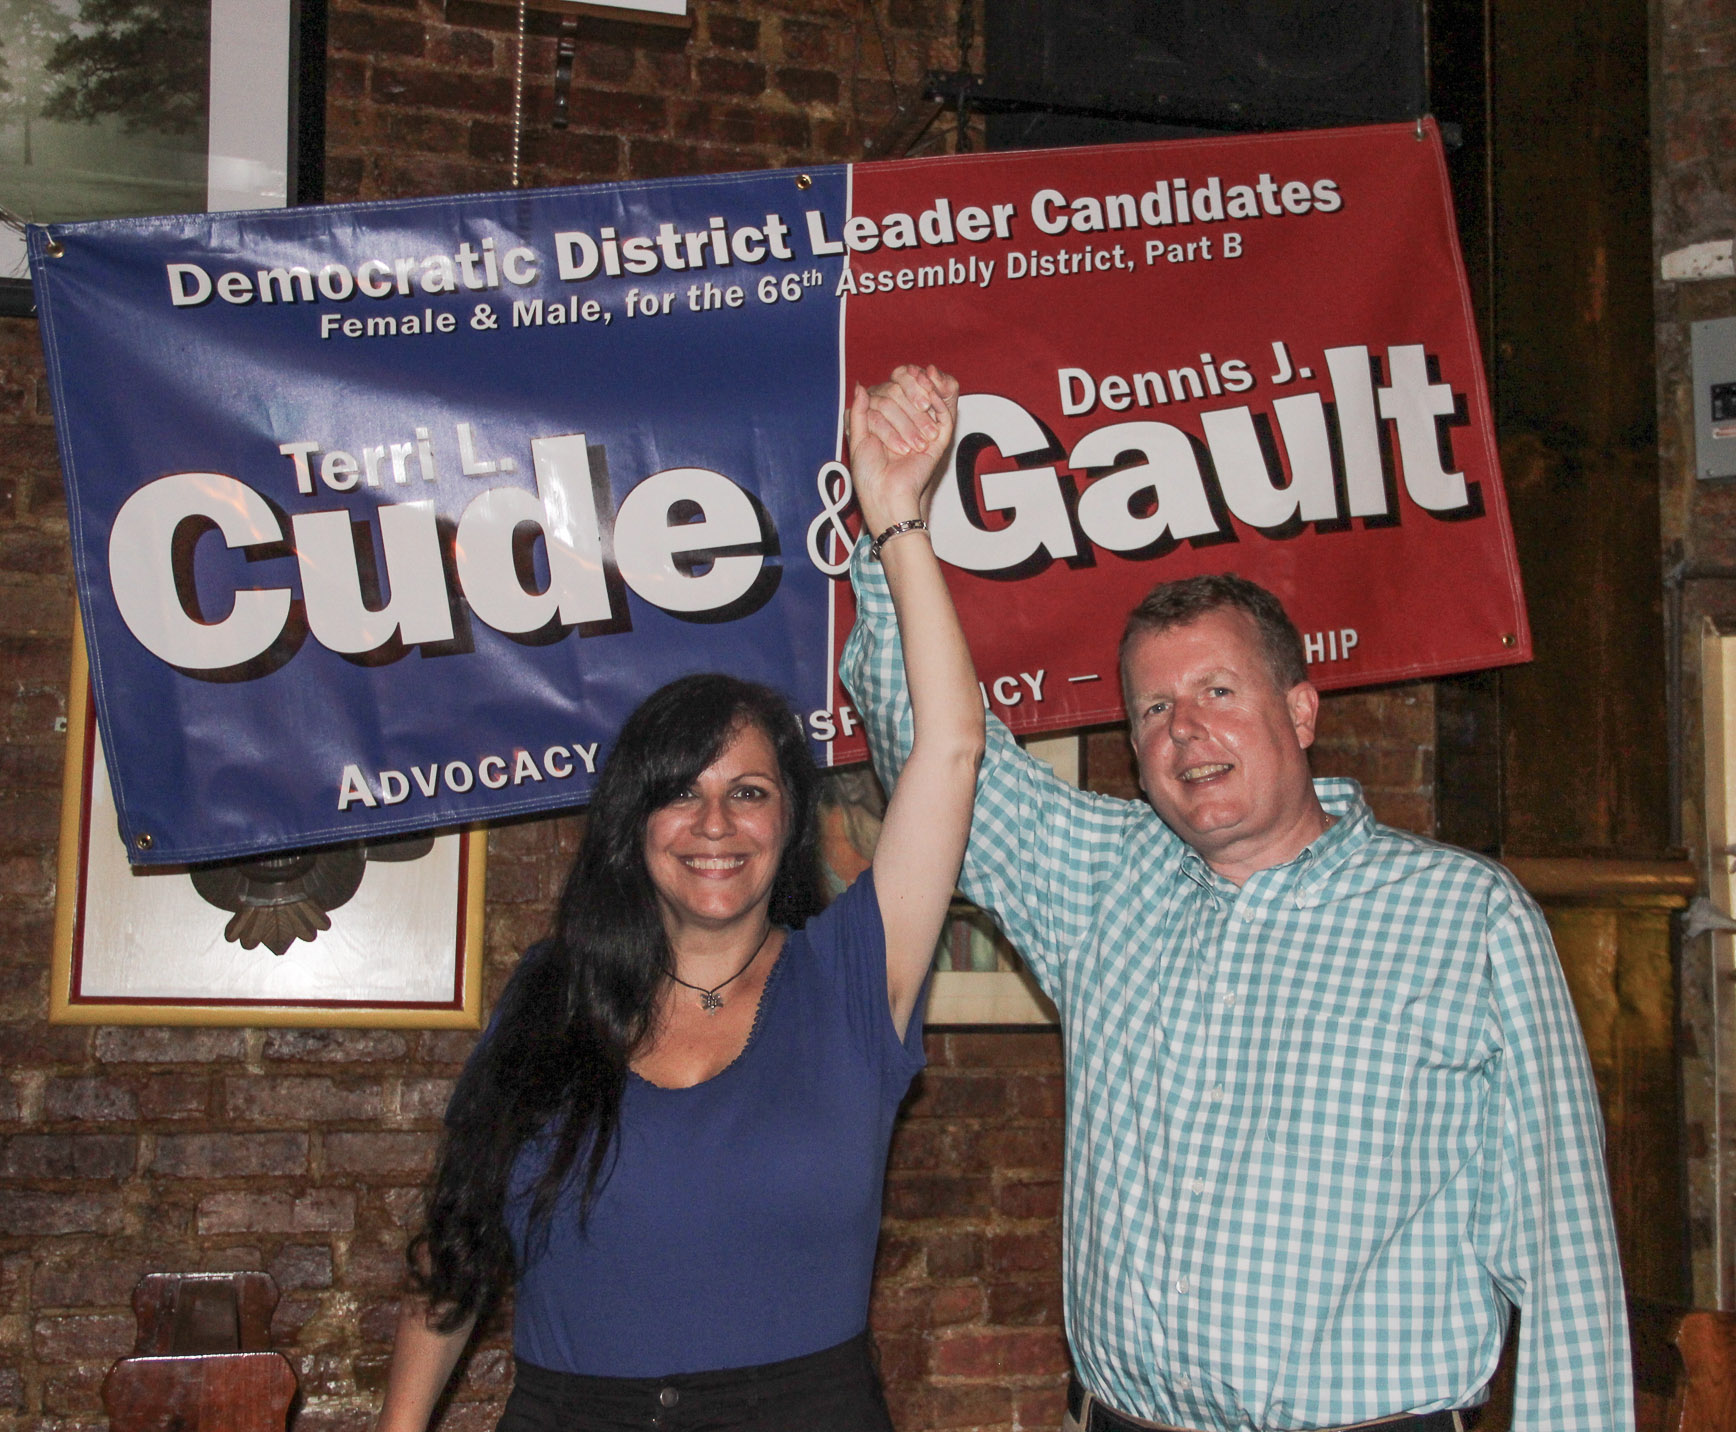 Terri Cude and Dennis Gault declaring victory Sept. 10 in their Democrtic district leader races. Downtown Express photo by Tequila Minsky.